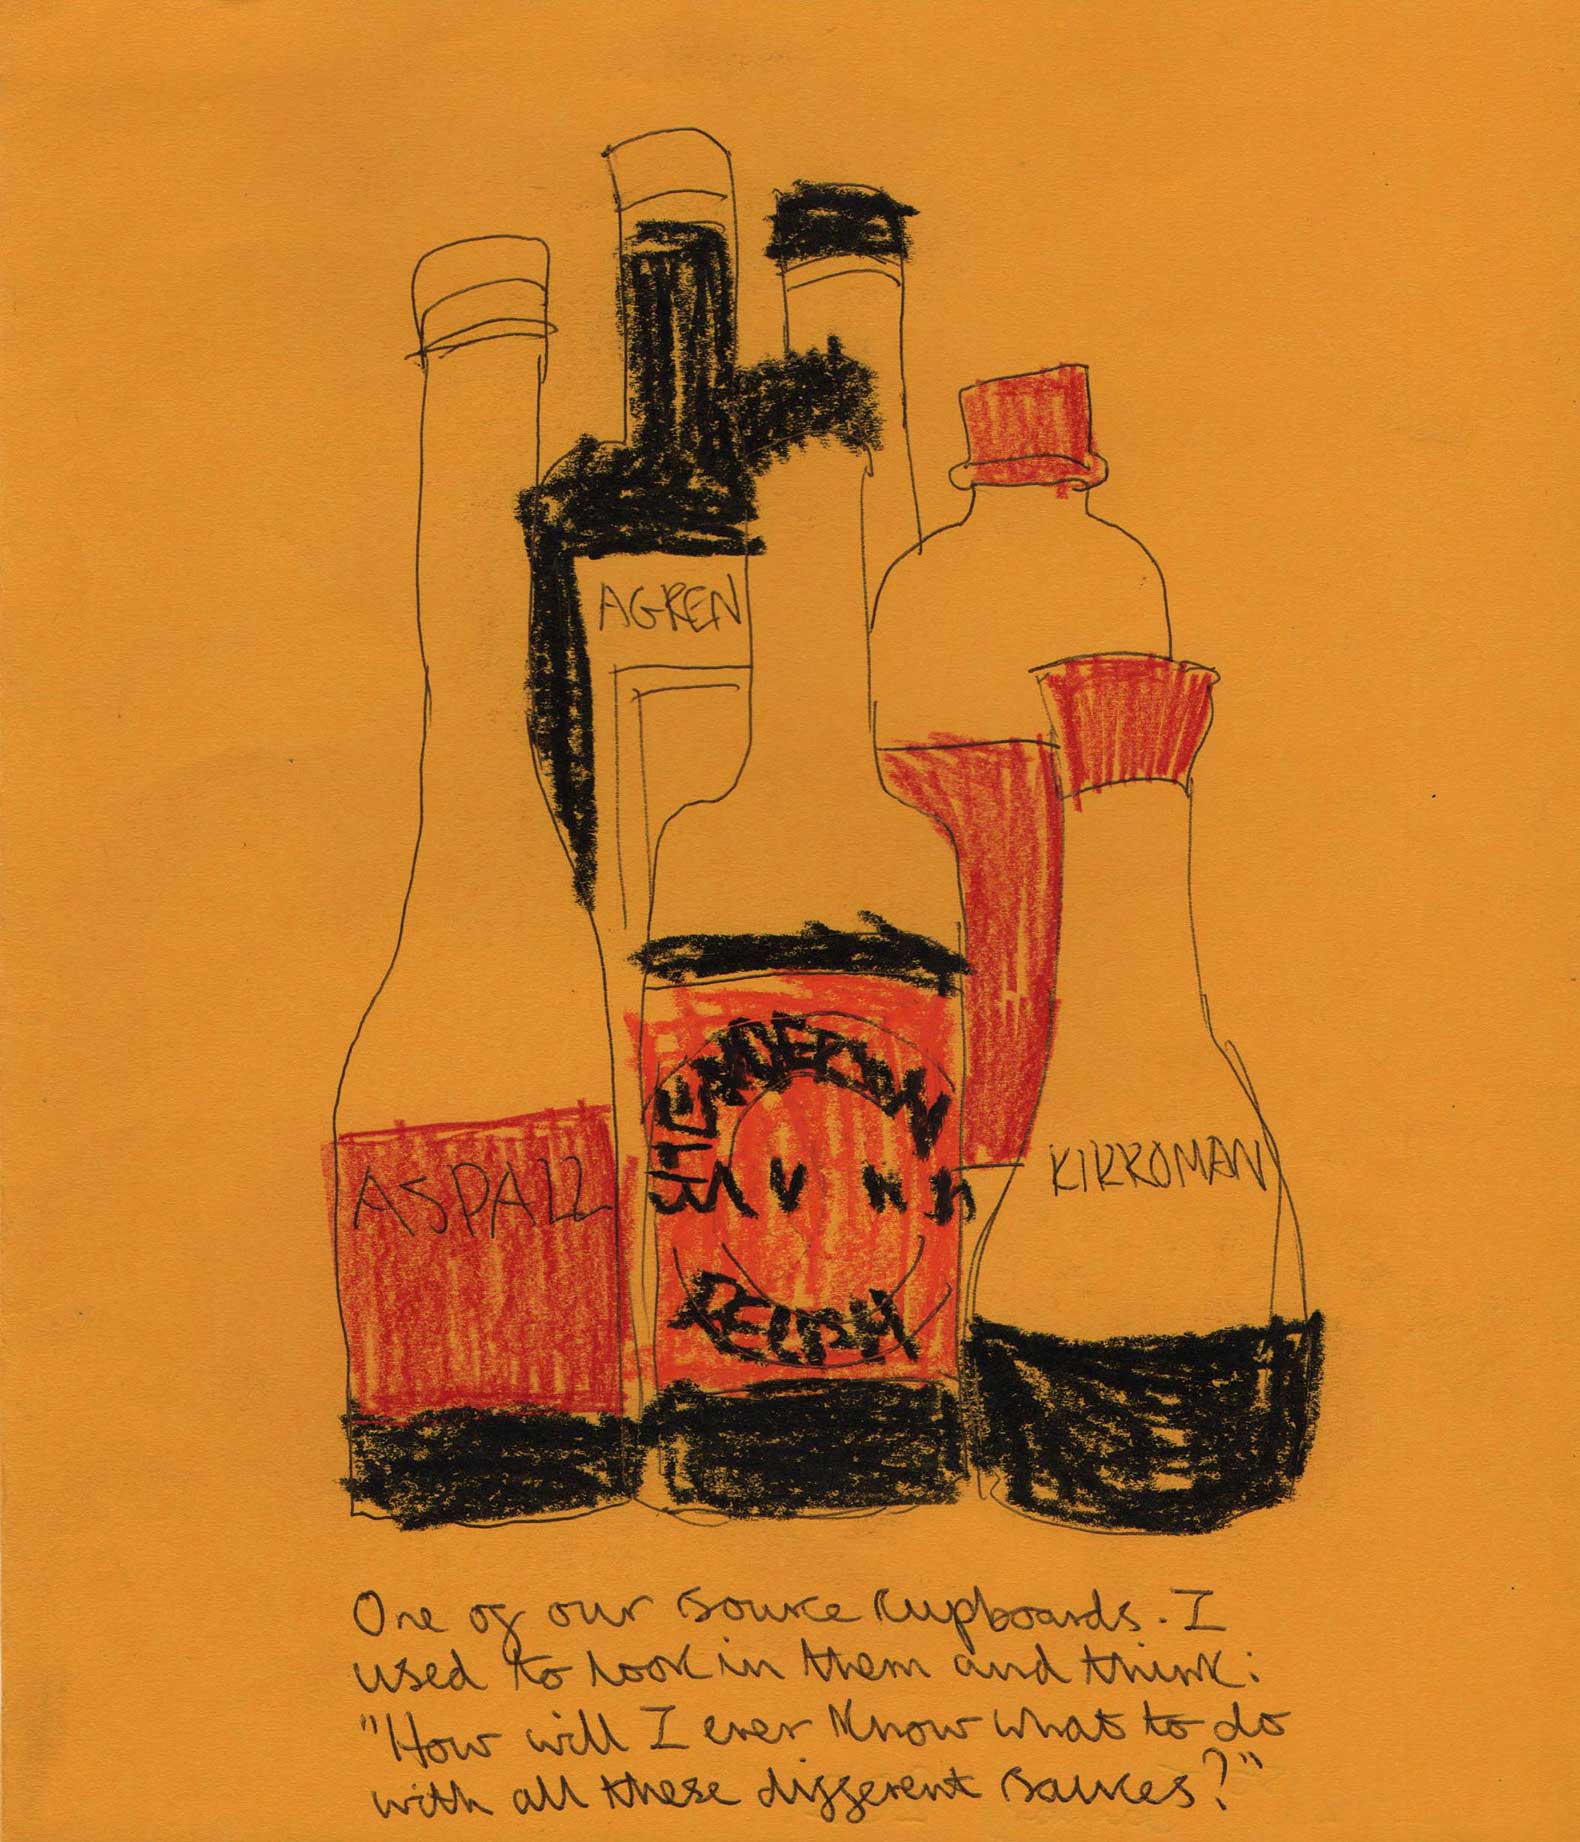 A group of different sauce bottles drawn with black pen, black pastel, red and orange pencil against a mustard yellow background.